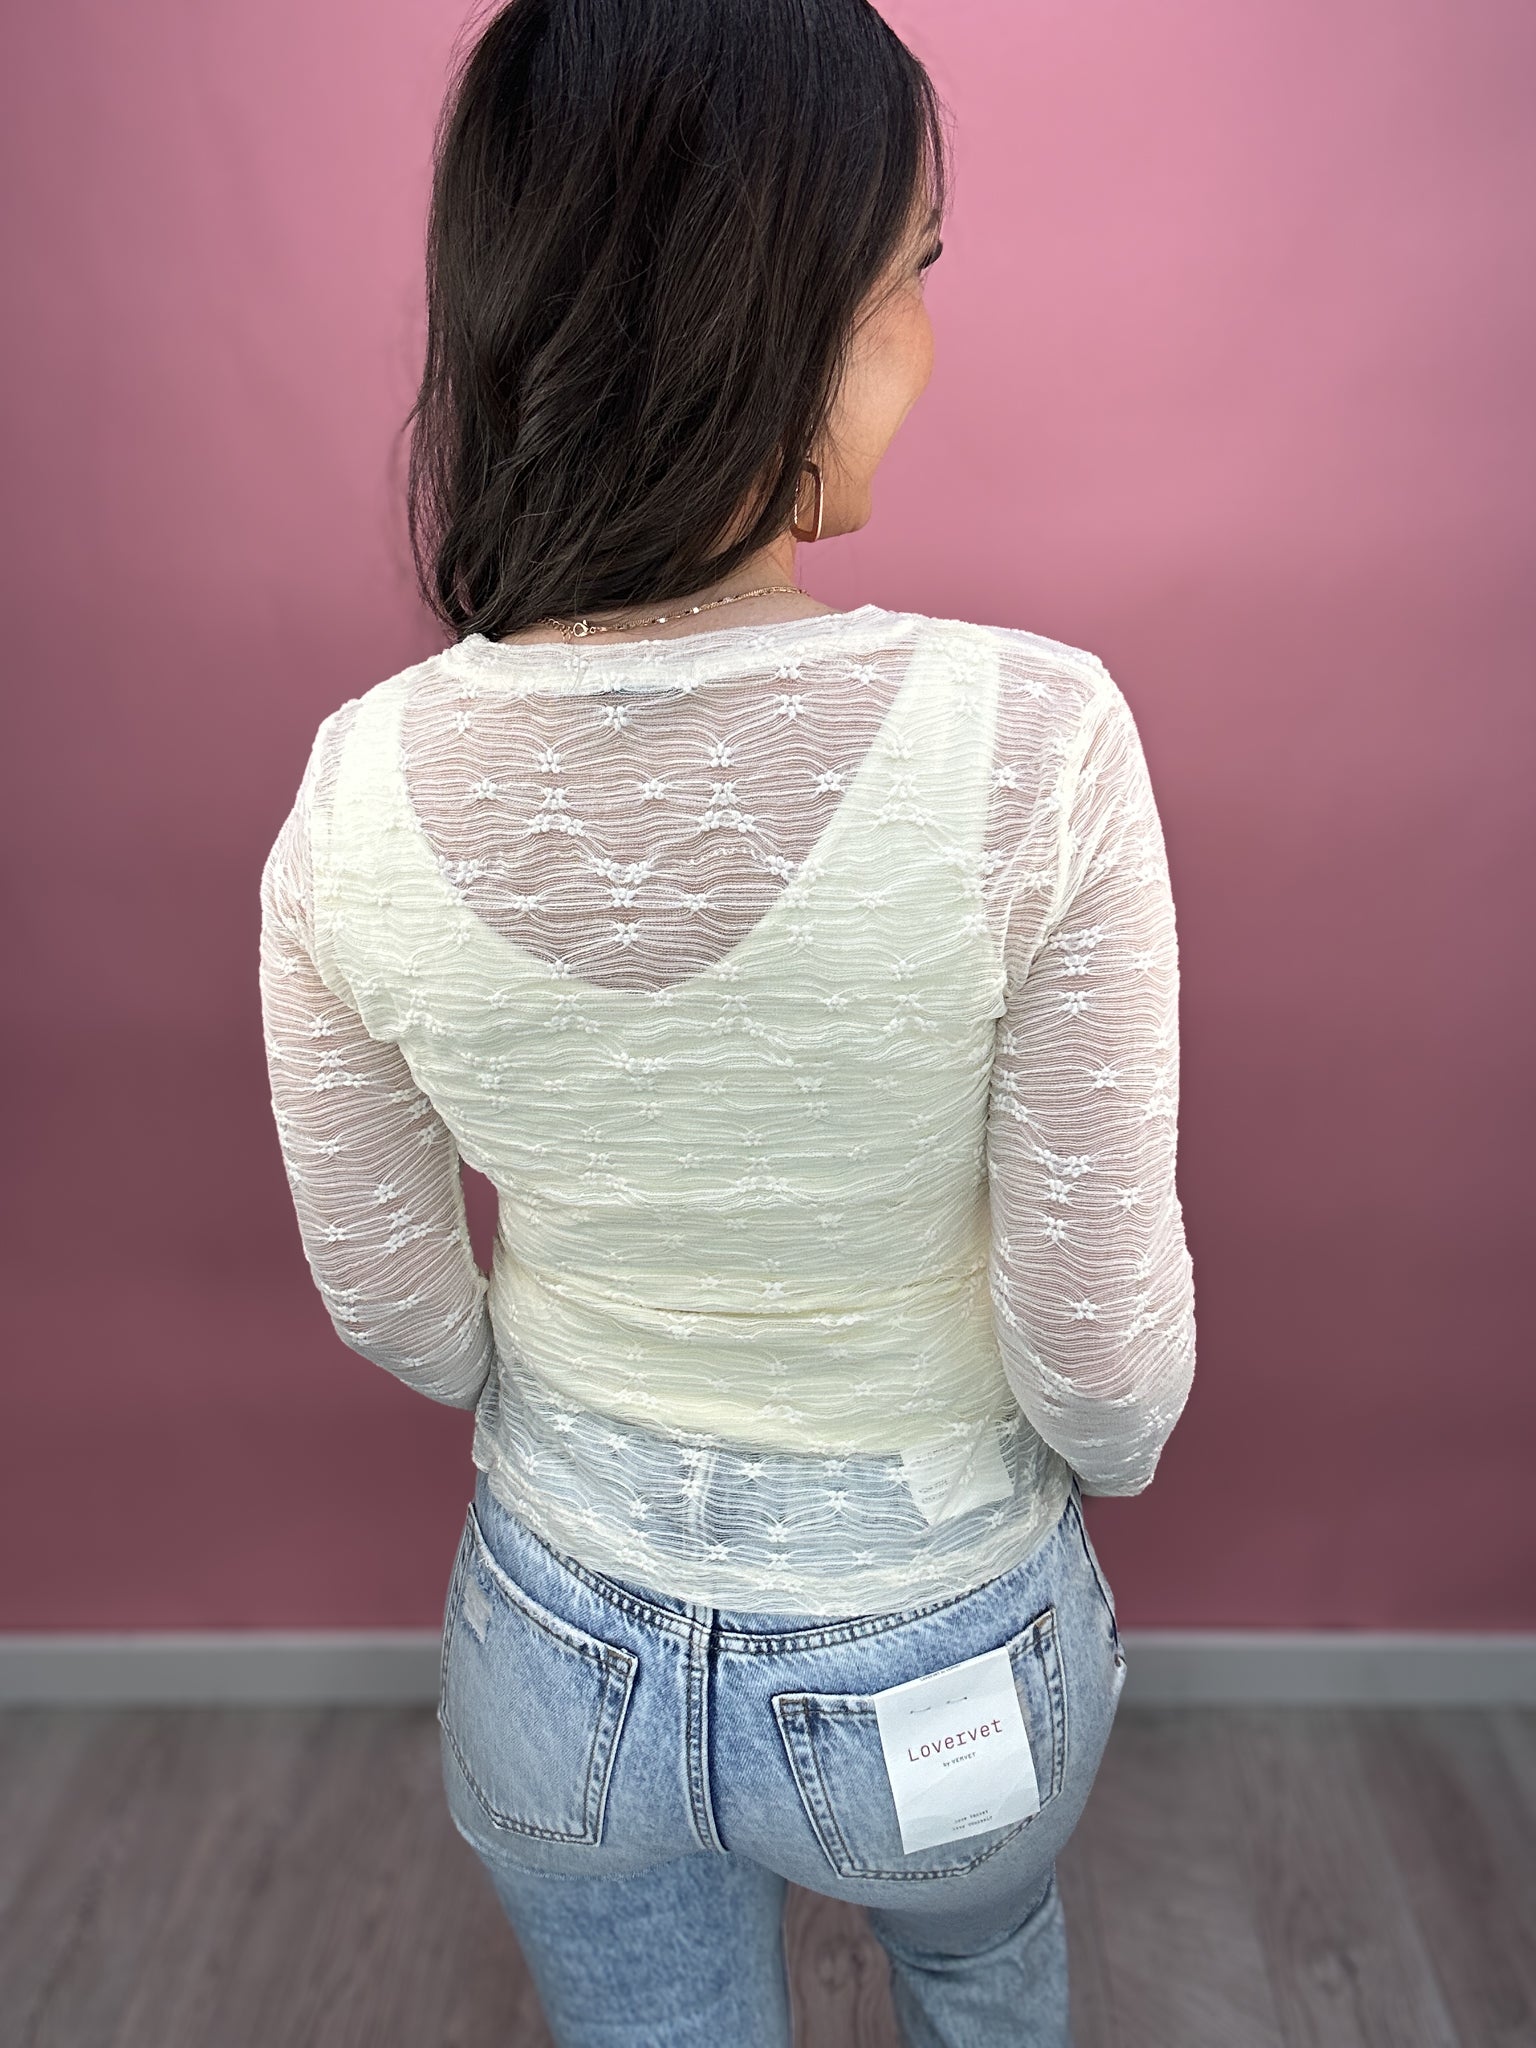 Daisy Floral Sheer Lace Top